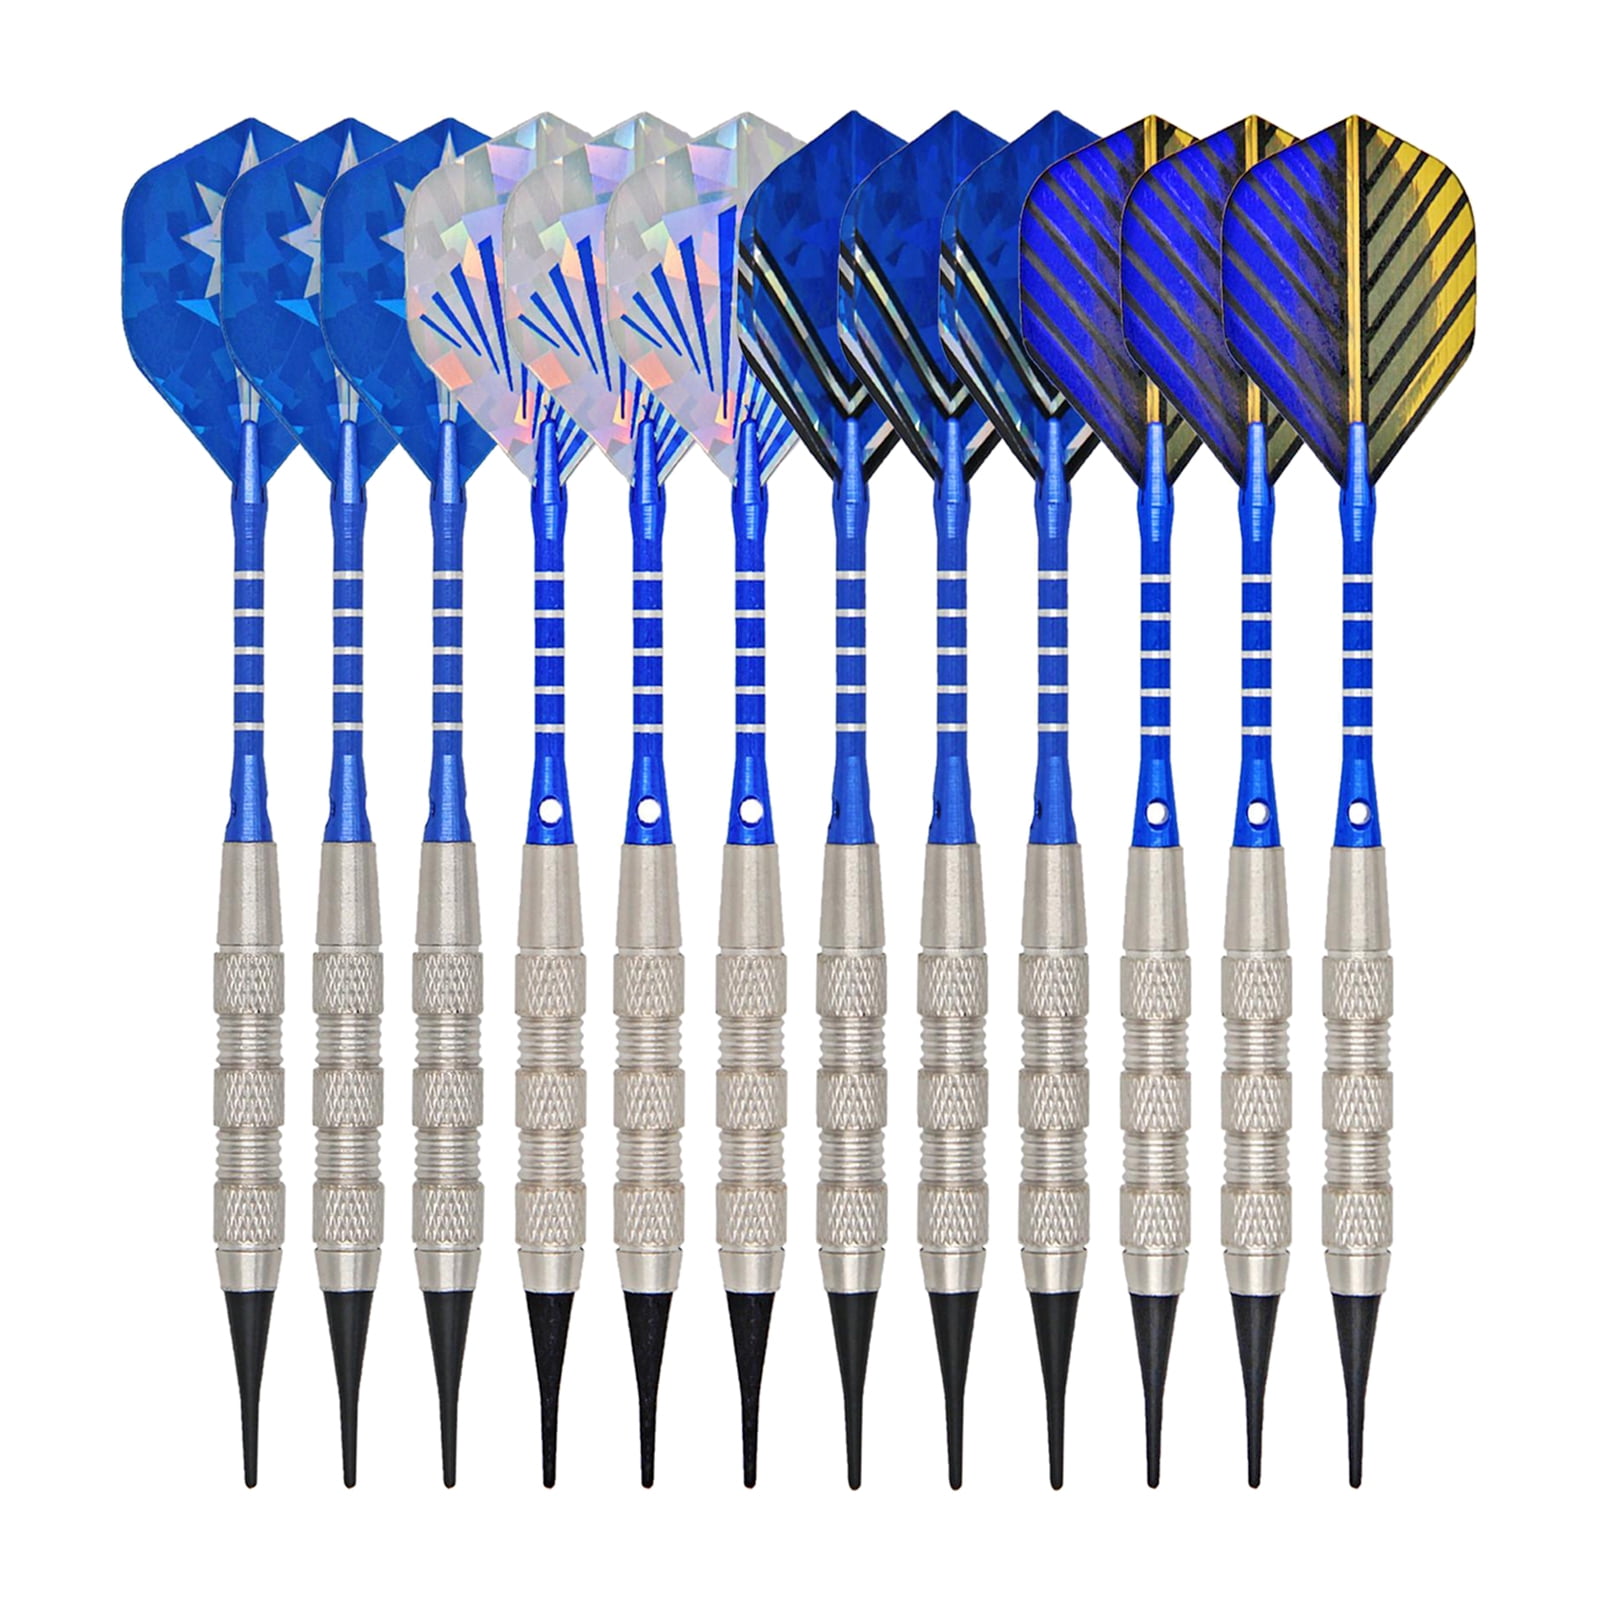 DARTS SOFT TIPS PACK OF 50 KEY POINT REPLACEMENT POINTS SPECIAL L6E8 OFFER E5A9 